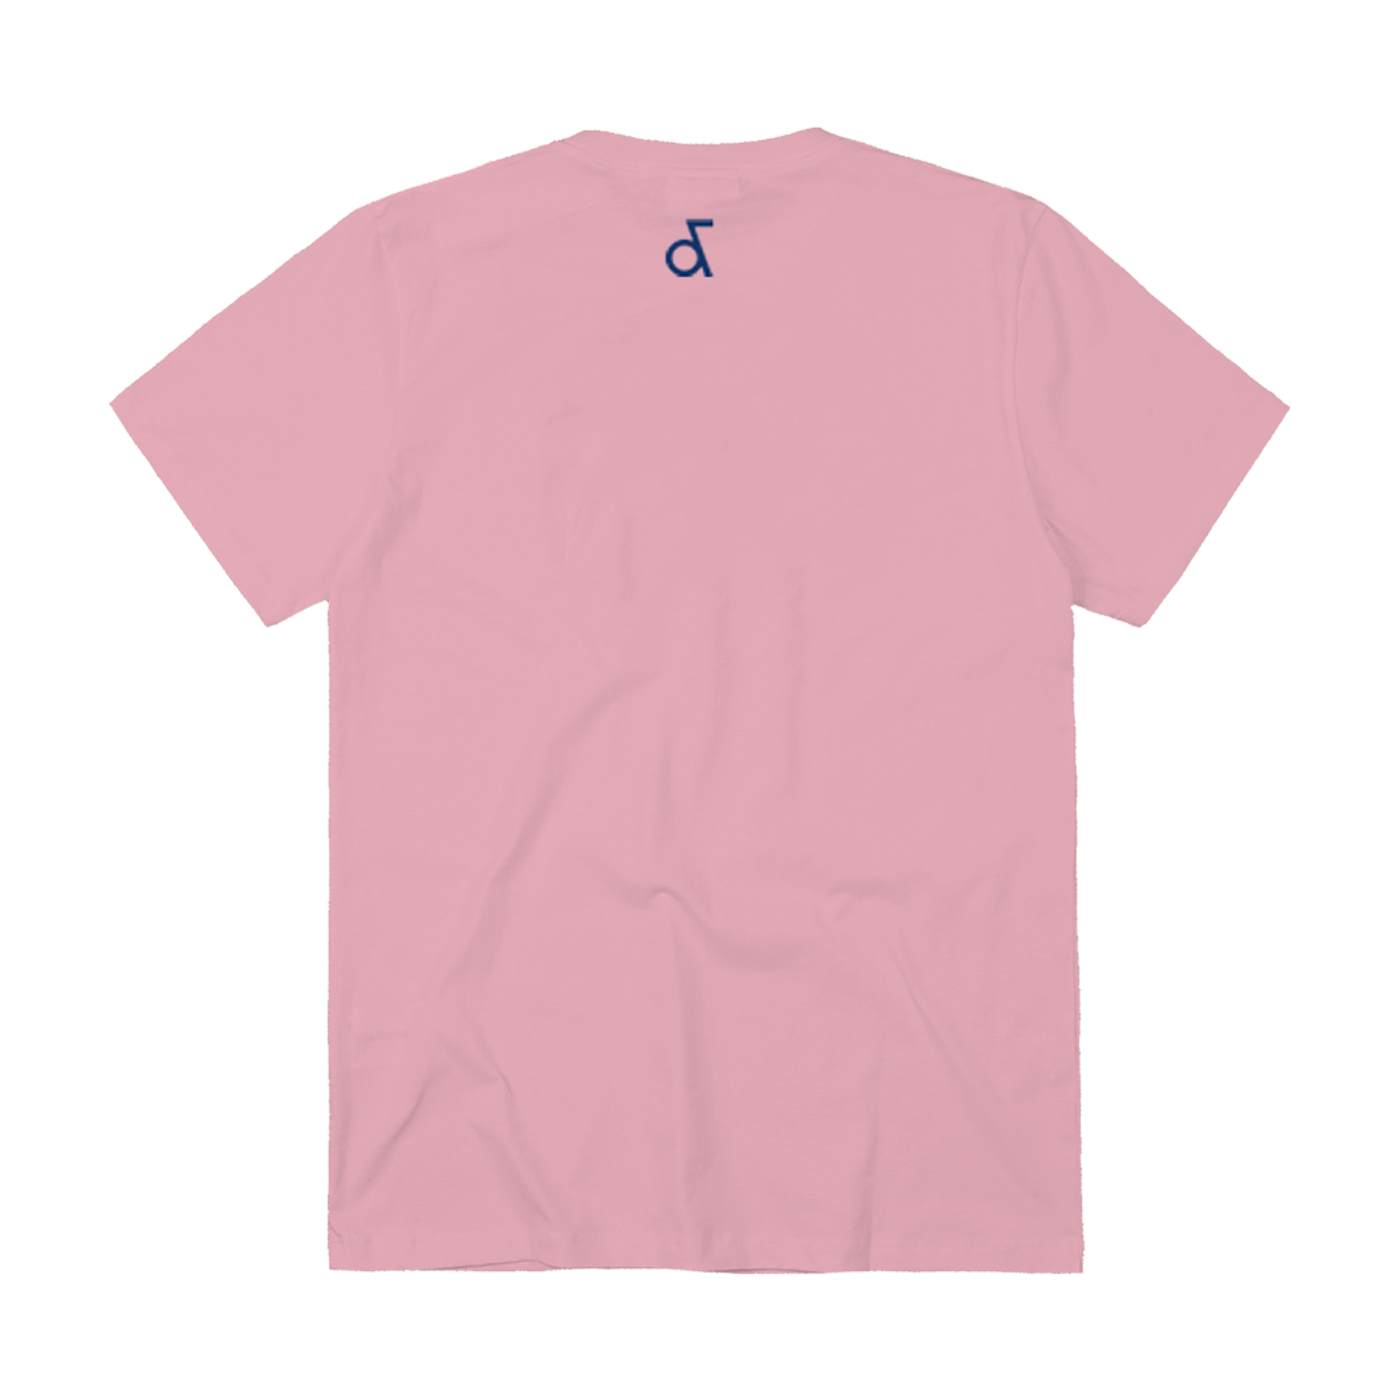 Aly & AJ WE DON'T STOP PINK TEE